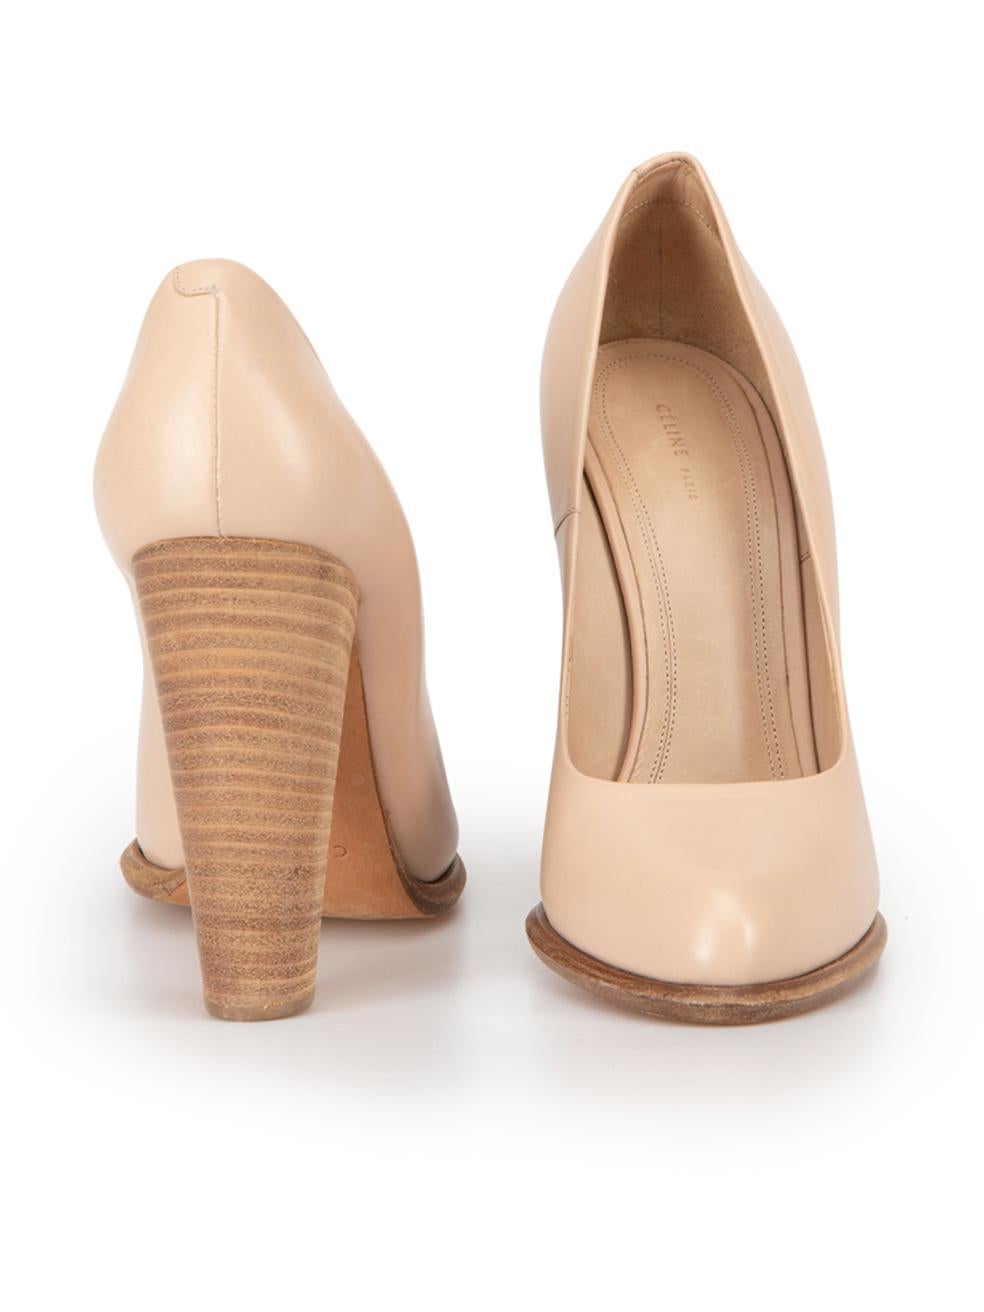 Céline Women's Nude Leather Stacked Heel Pumps In Good Condition For Sale In London, GB